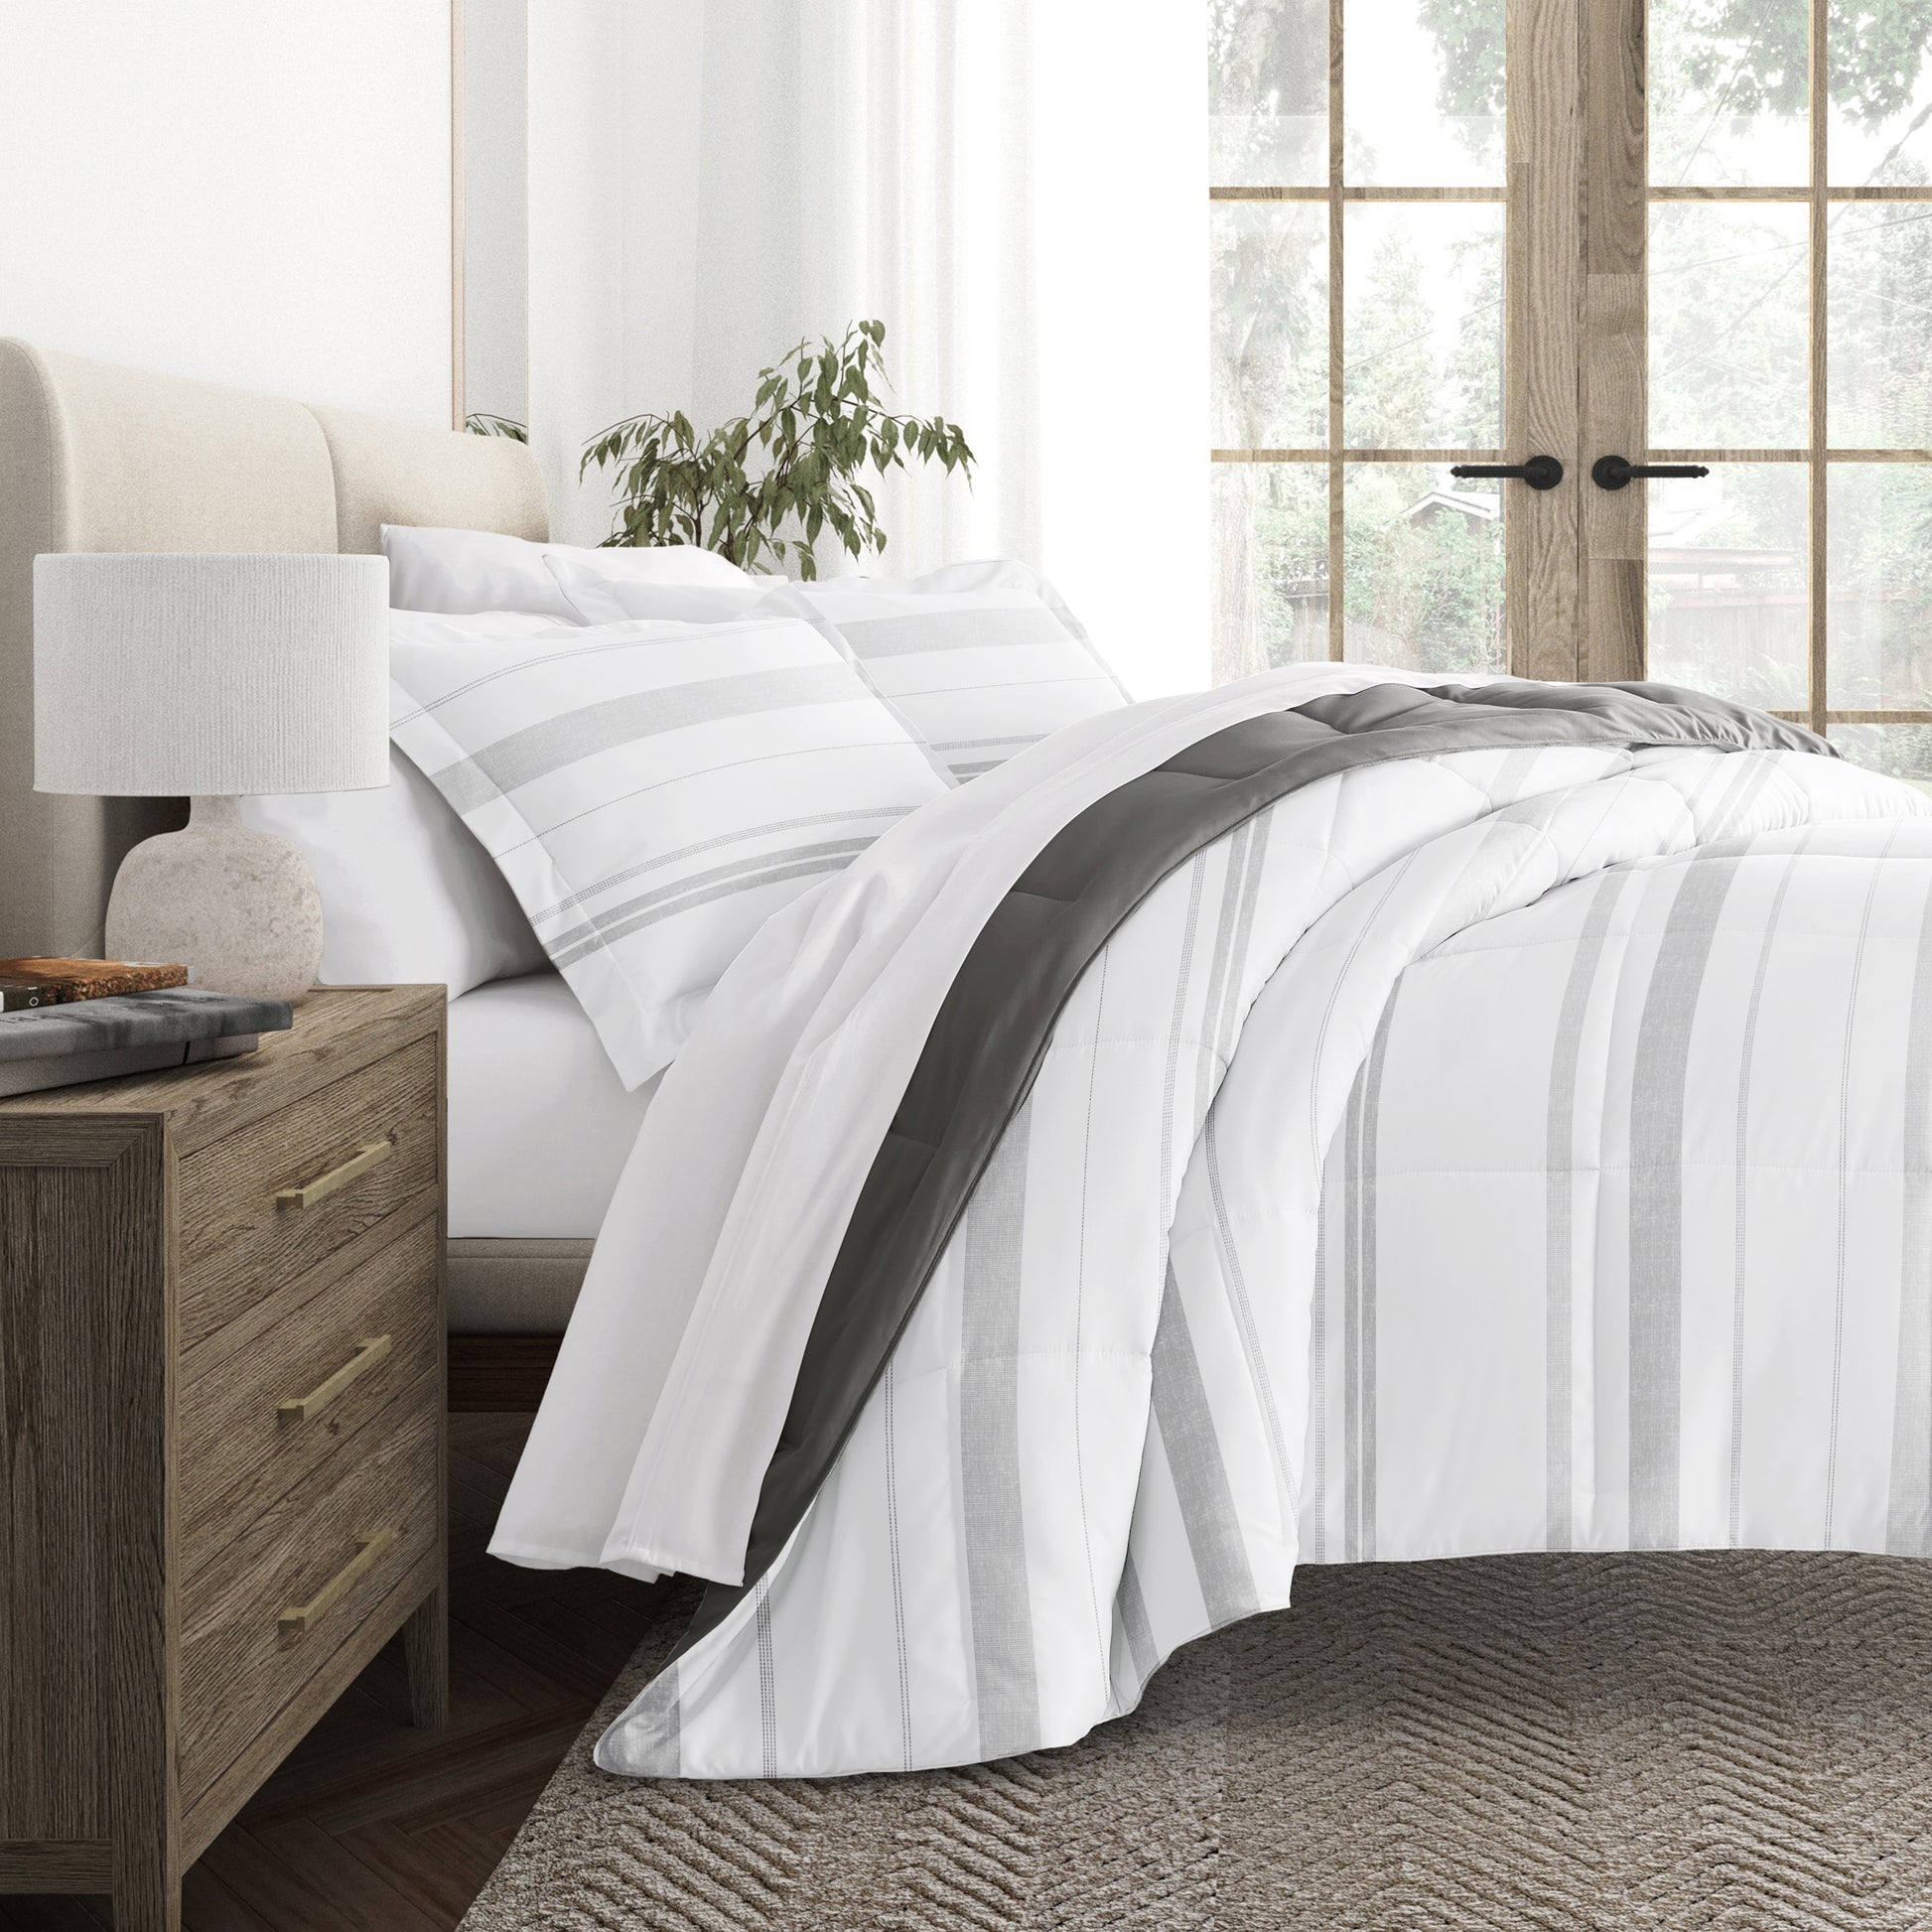 ienjoy Home Restyle your Room Reversible Comforter Set by The Home